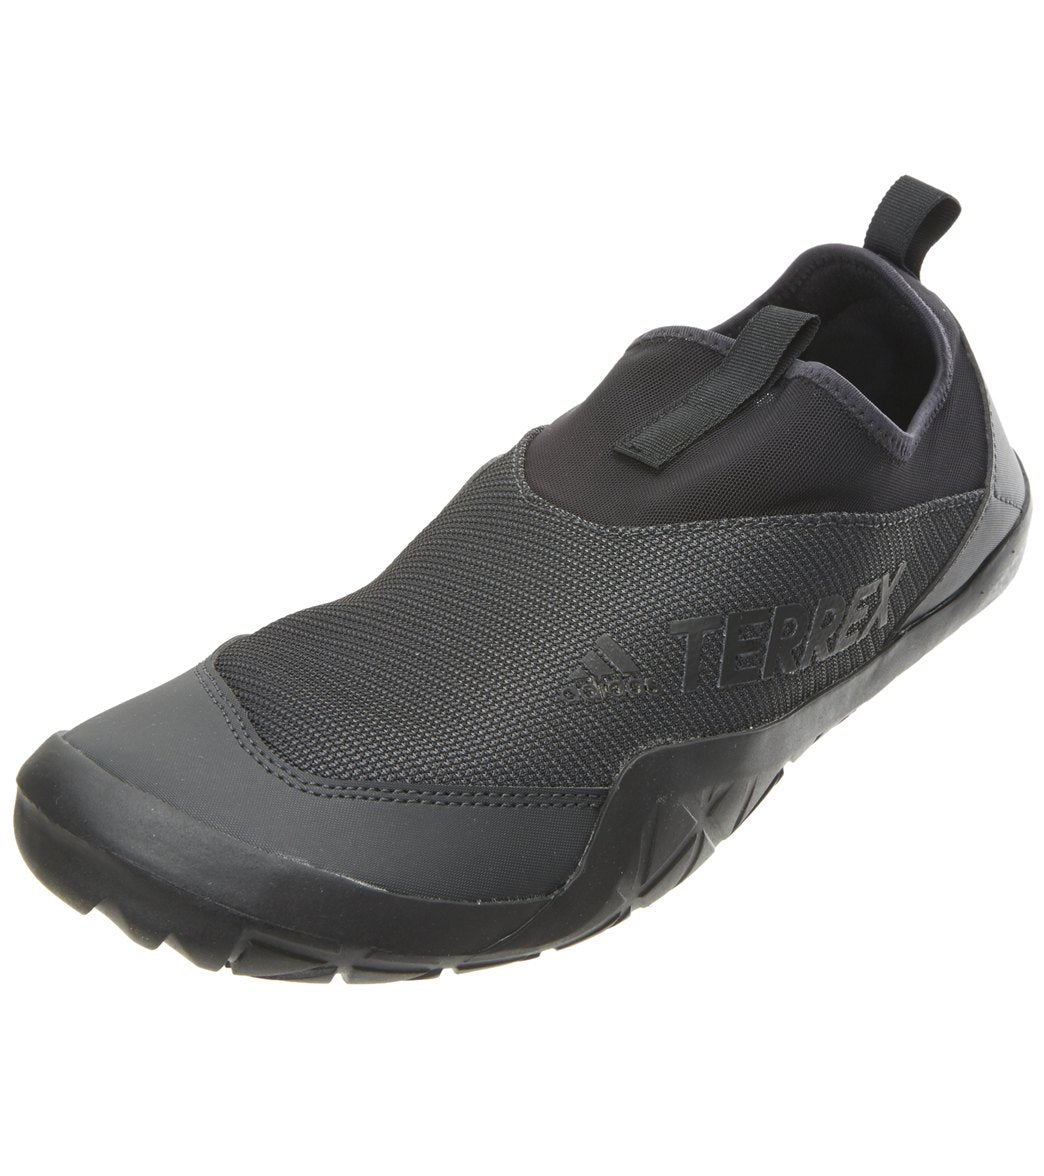 Adidas Men's Climacool Jawpaw Slip-On Water Shoe at SwimOutlet.com